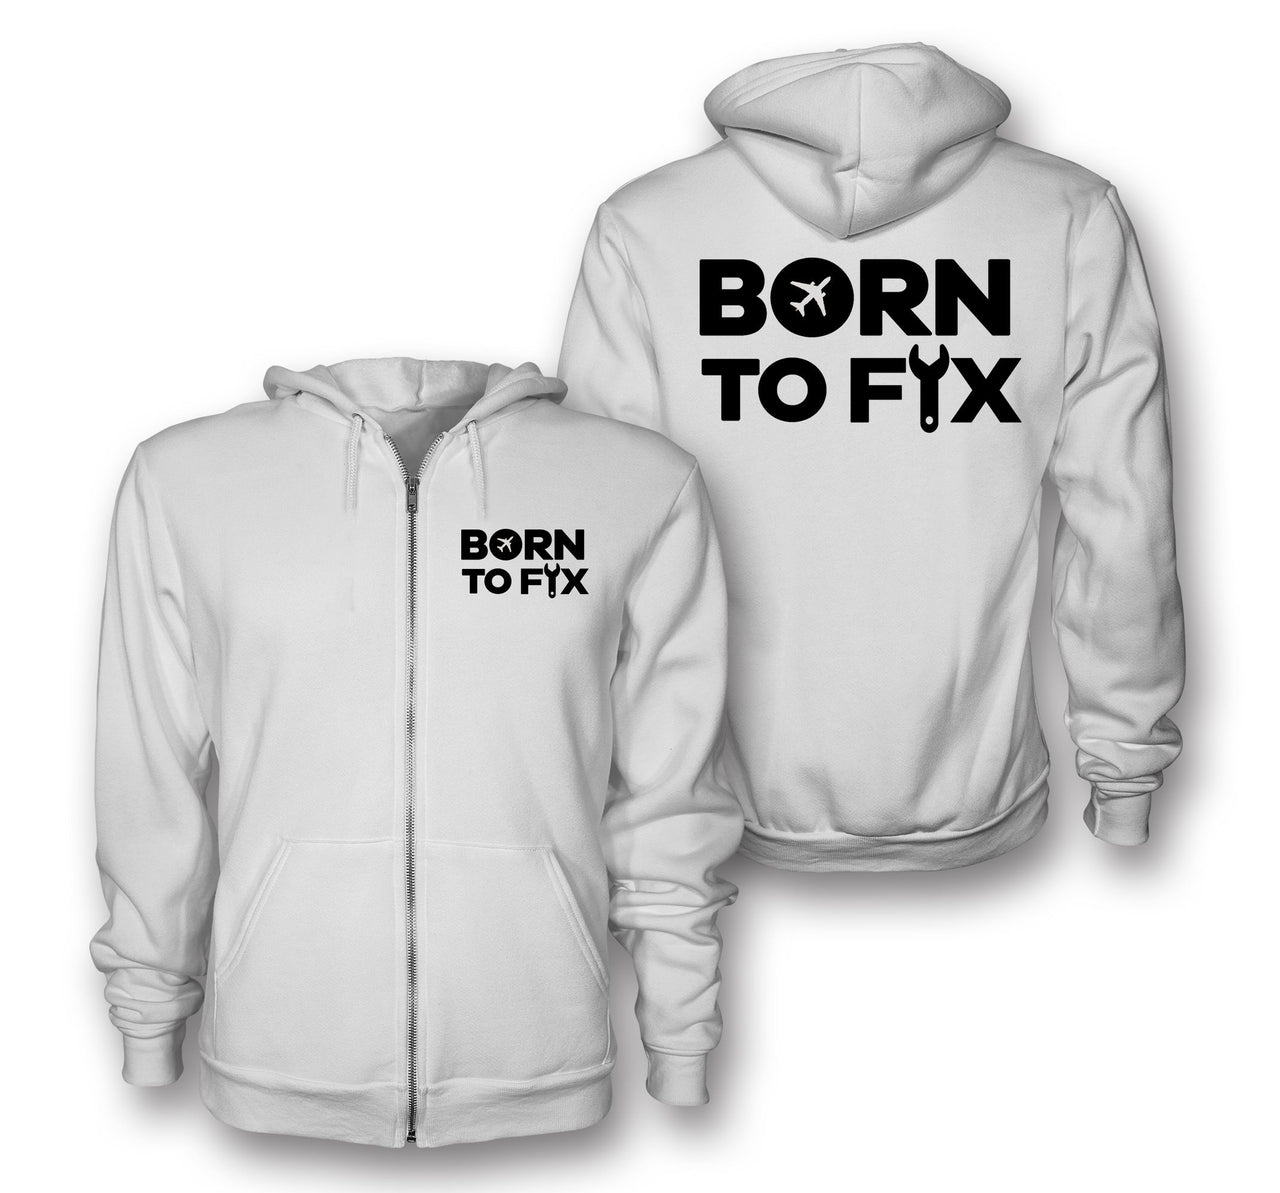 Born To Fix Airplanes Designed Zipped Hoodies